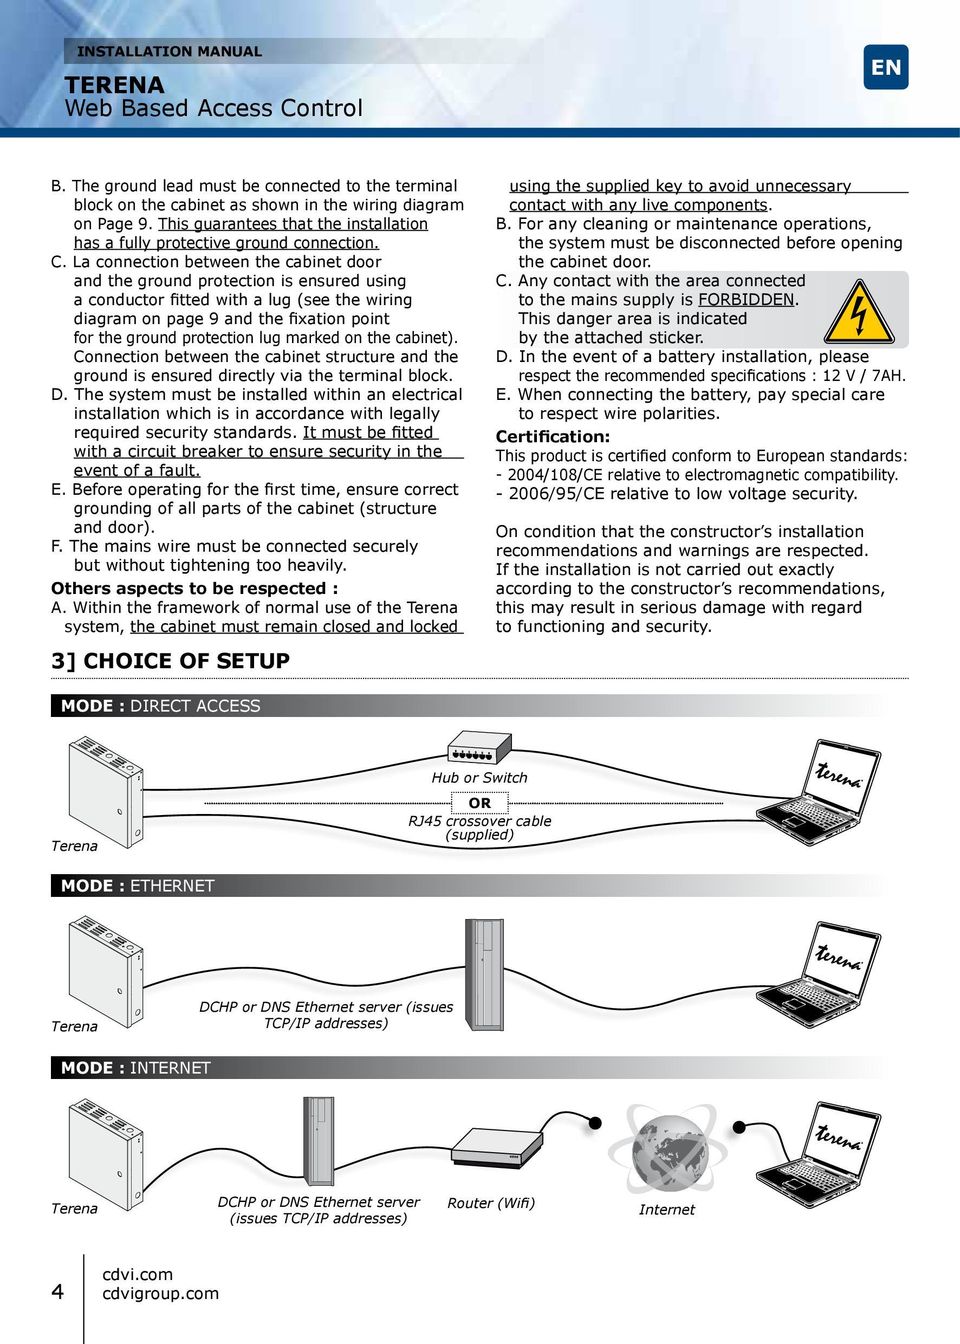 La connection between the cabinet door and the ground protection is ensured using a conductor fitted with a lug (see the wiring diagram on page 9 and the fixation point for the ground protection lug